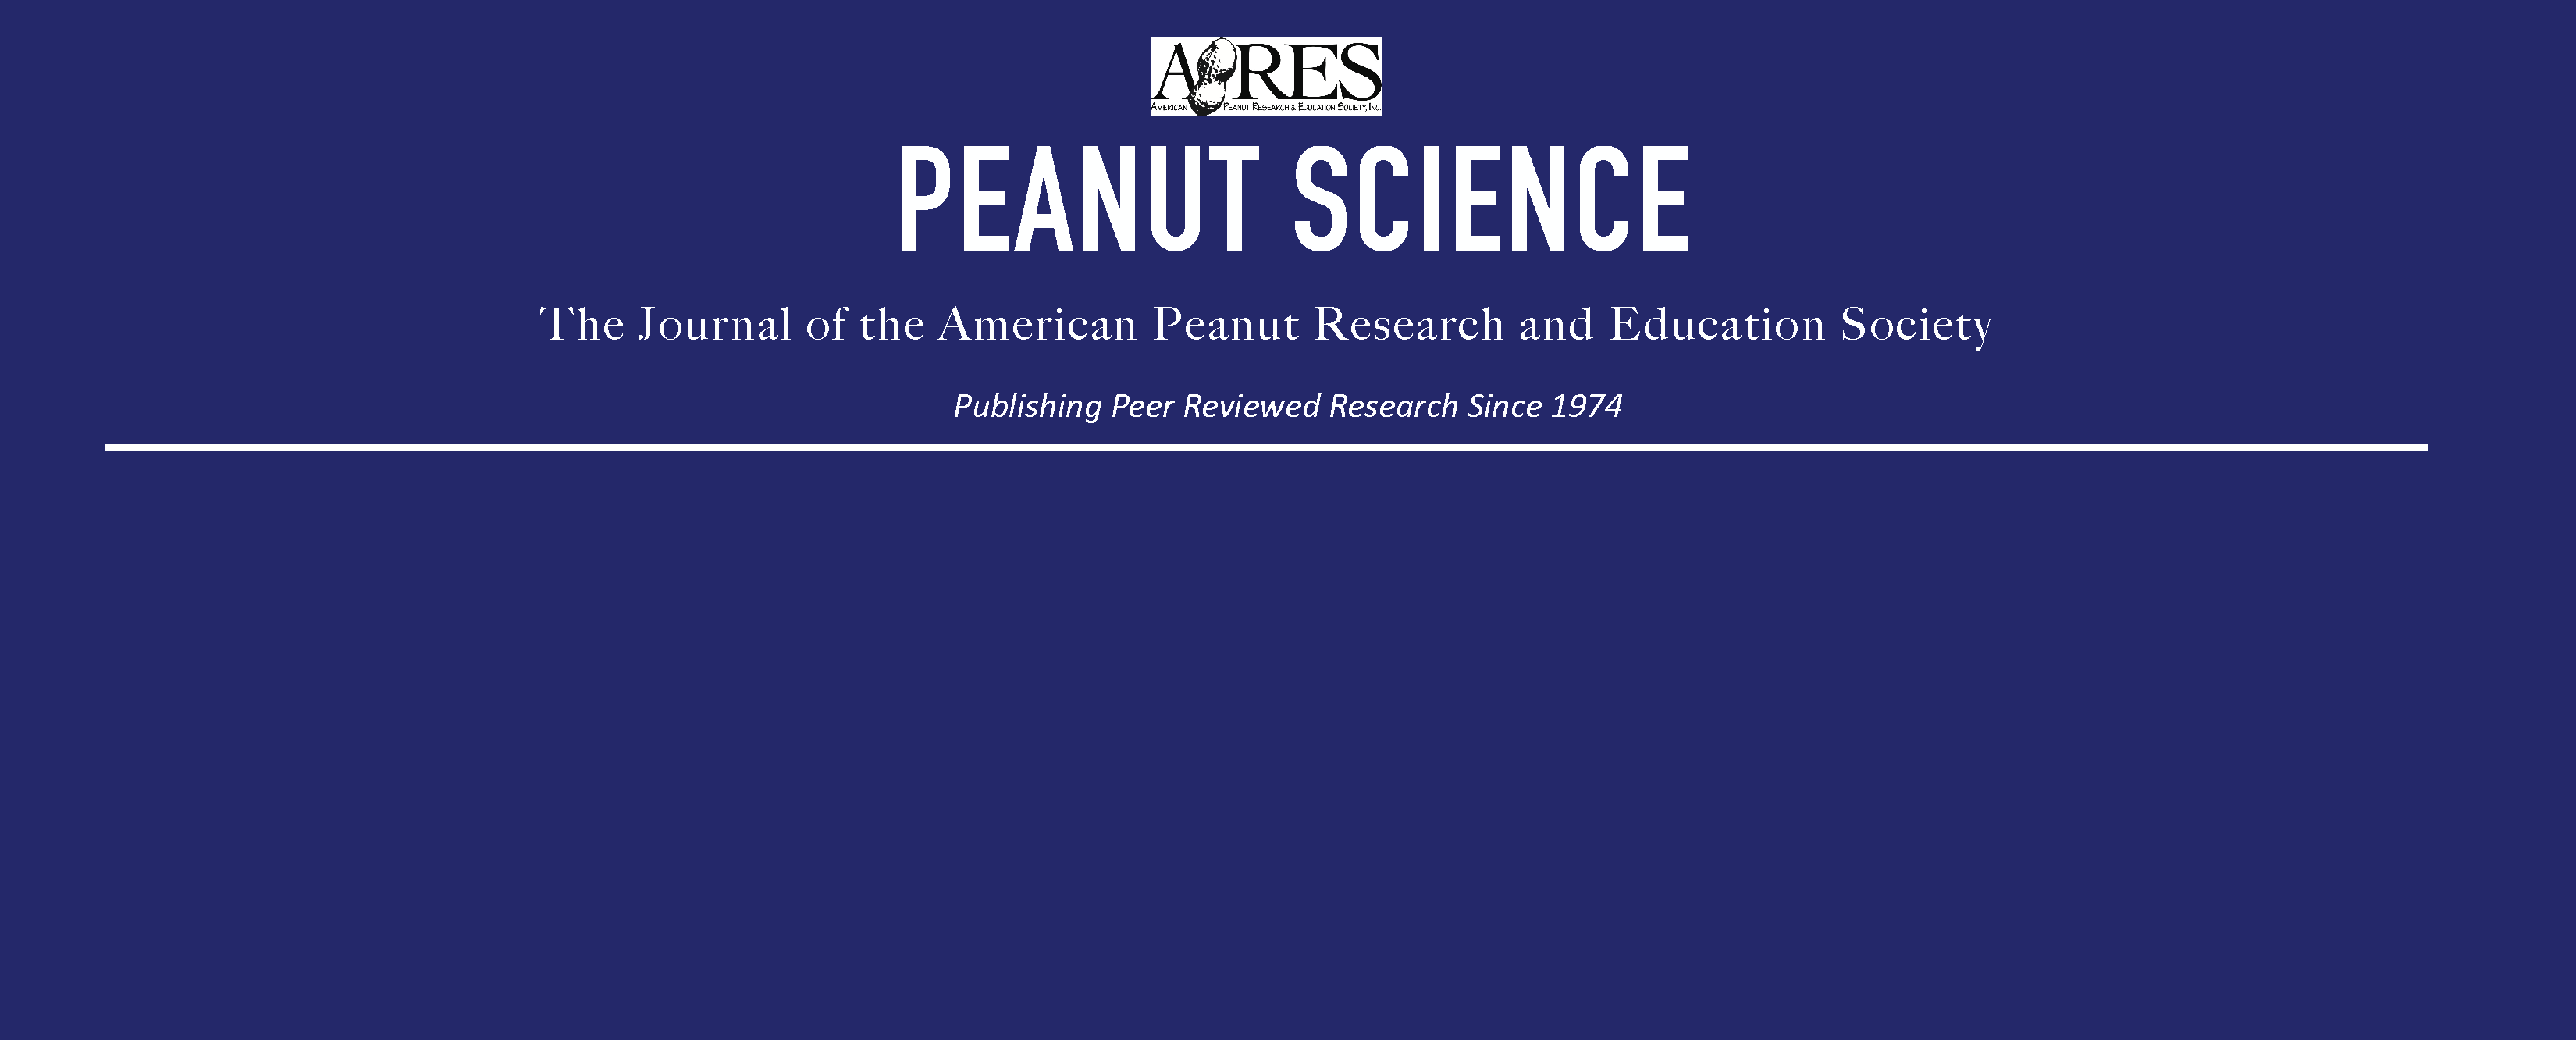 Genotyping and Fatty Acid Composition Analysis in Segregating Peanut (Arachis hypogaea L.) Populations